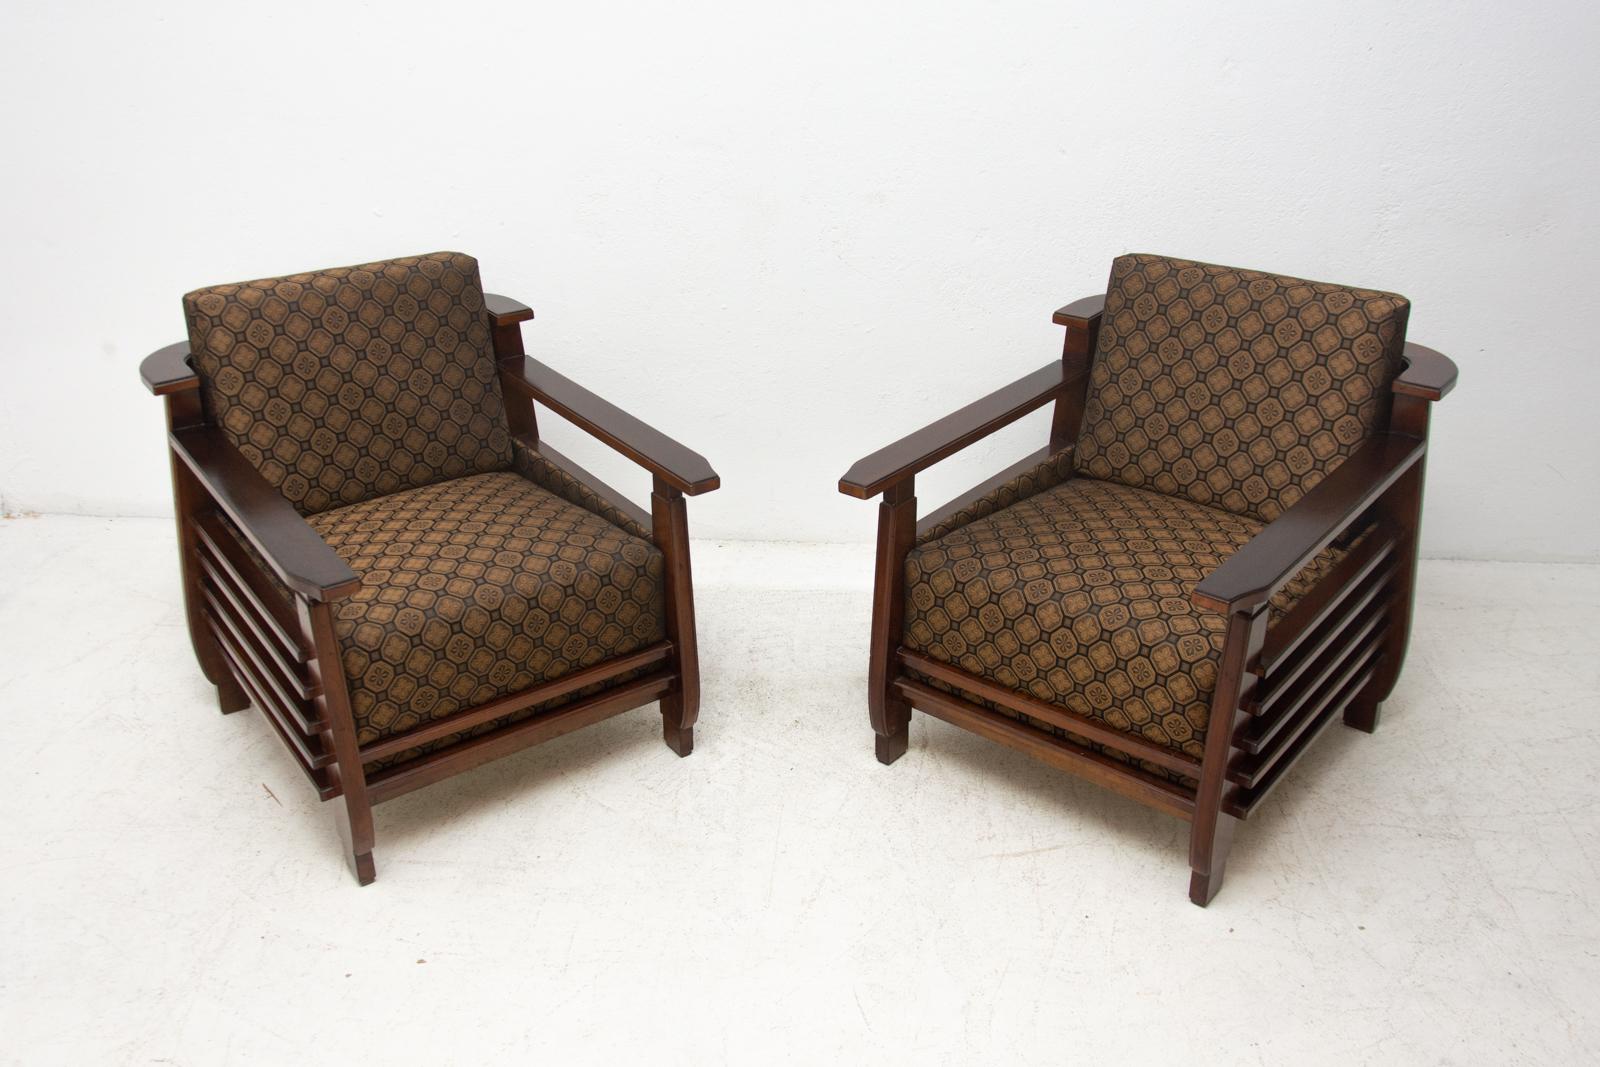 Austrian Pair of Fully Restored Functionalist Armchairs, 1930s, Austria, Bauhaus Period For Sale